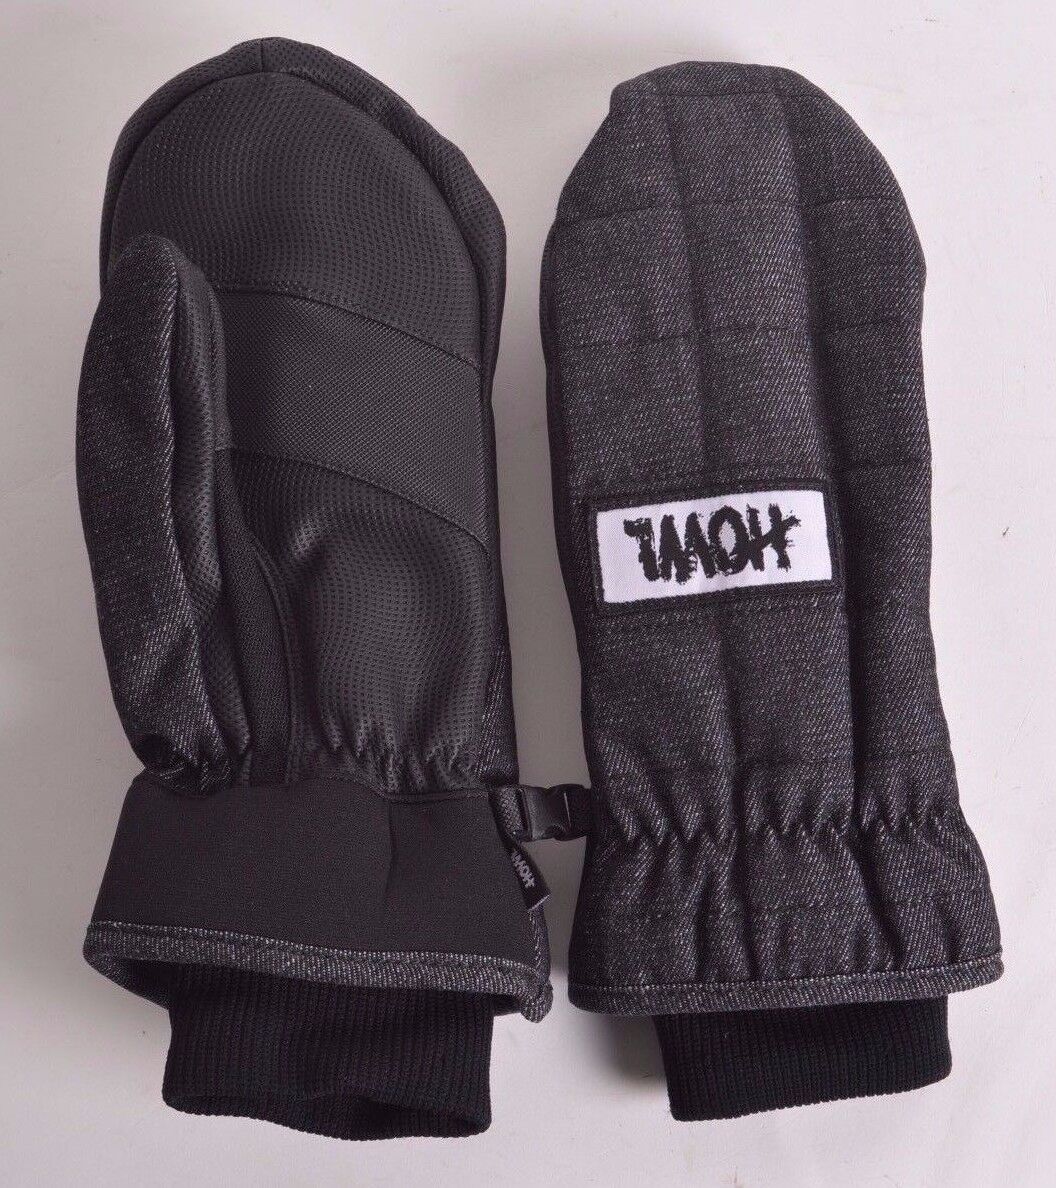 NWT MENS HOWL JED Cheap Attention brand MITTEN $49 dur denim twill black quilted